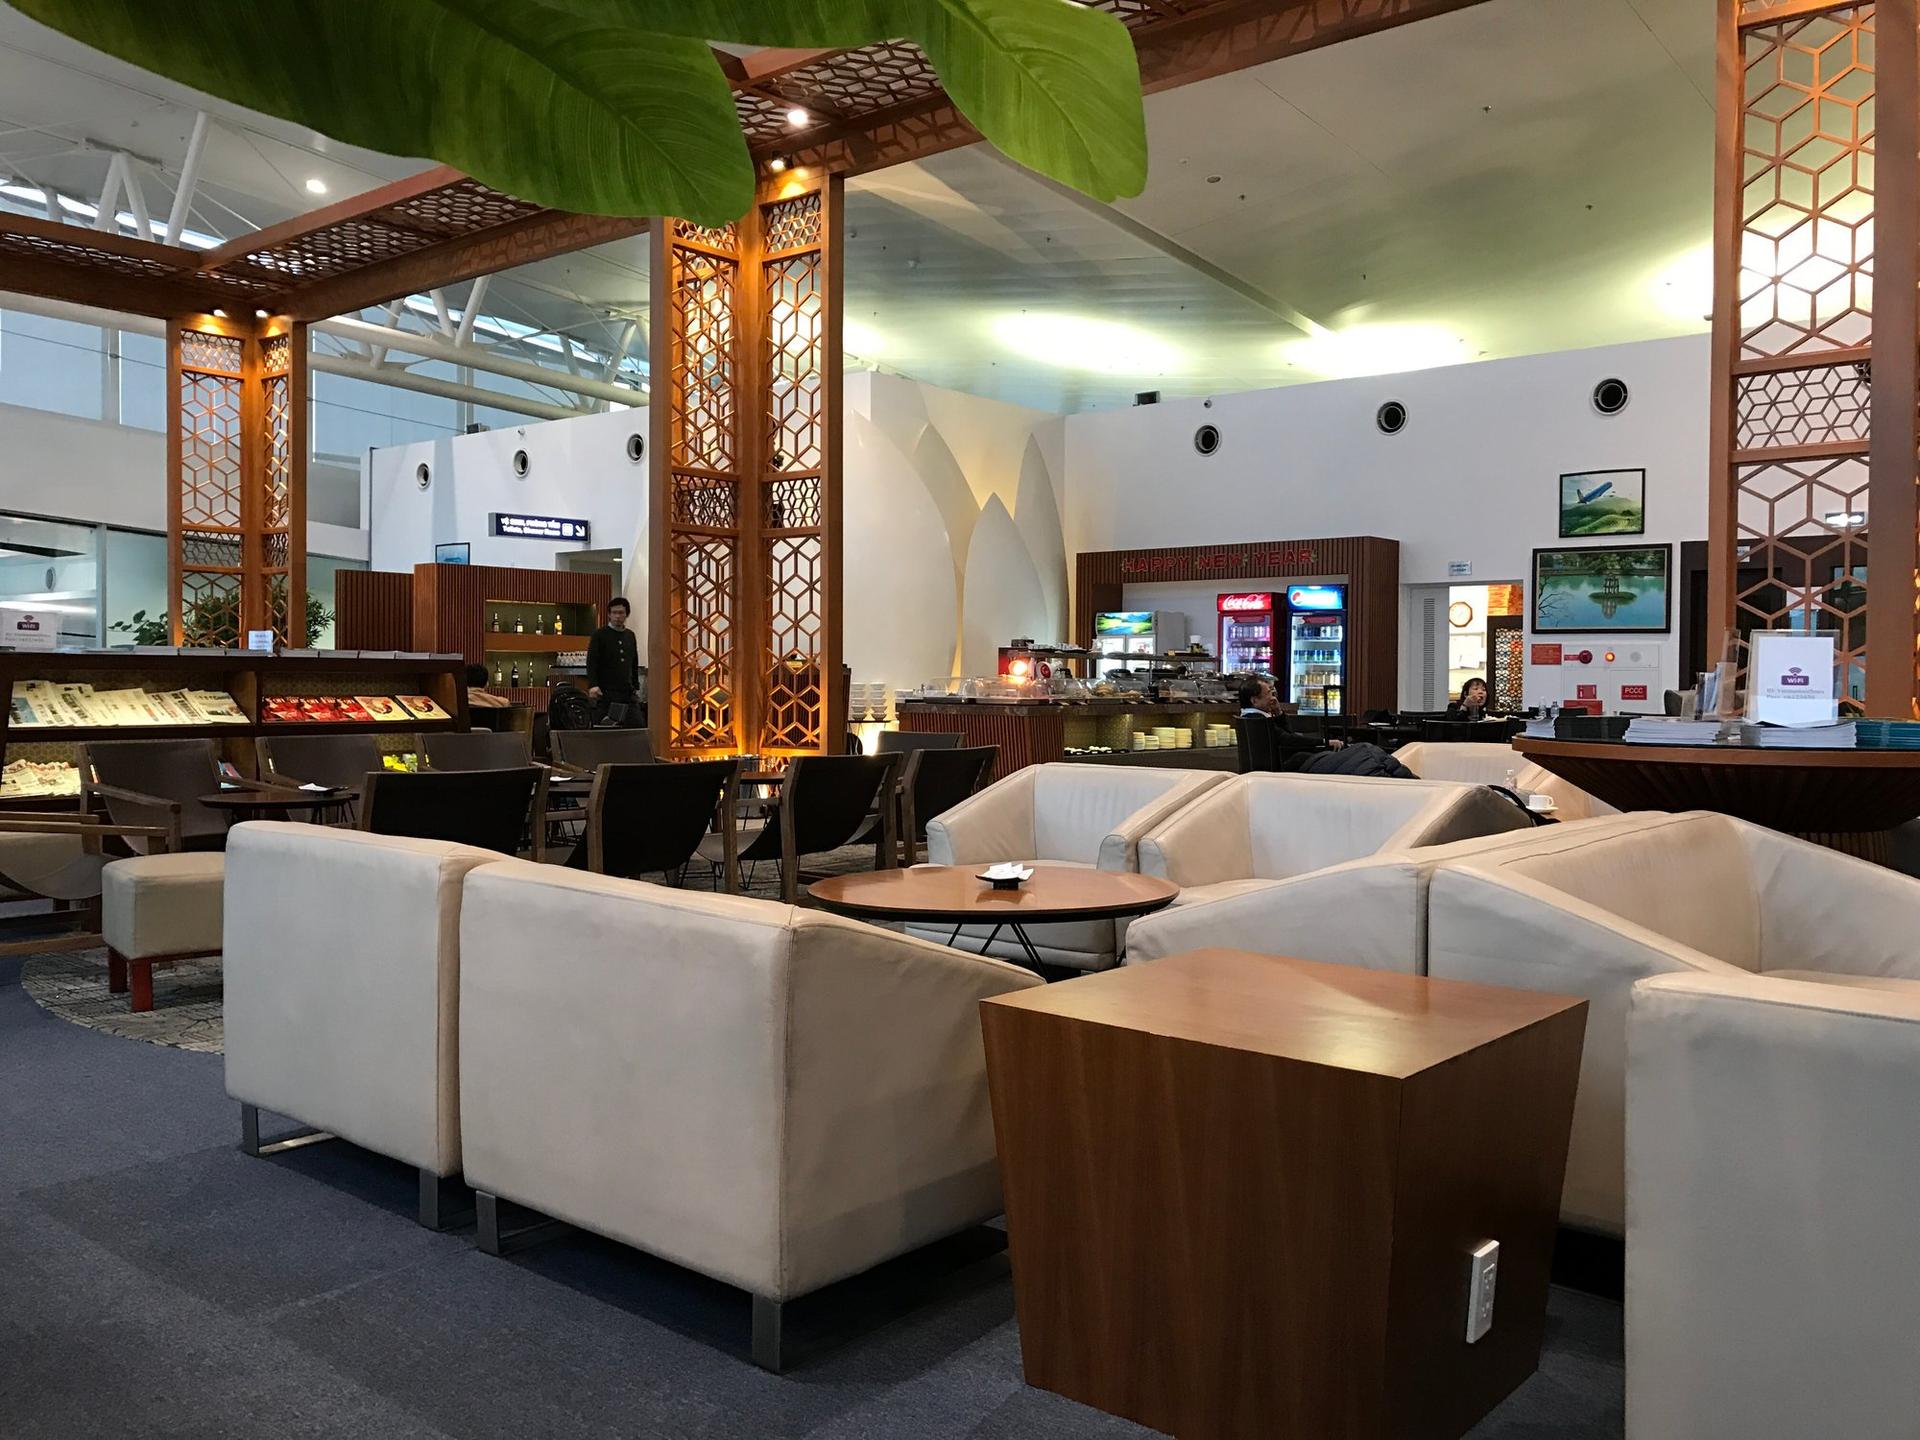 Vietnam Airlines Business Class Lounge image 11 of 16